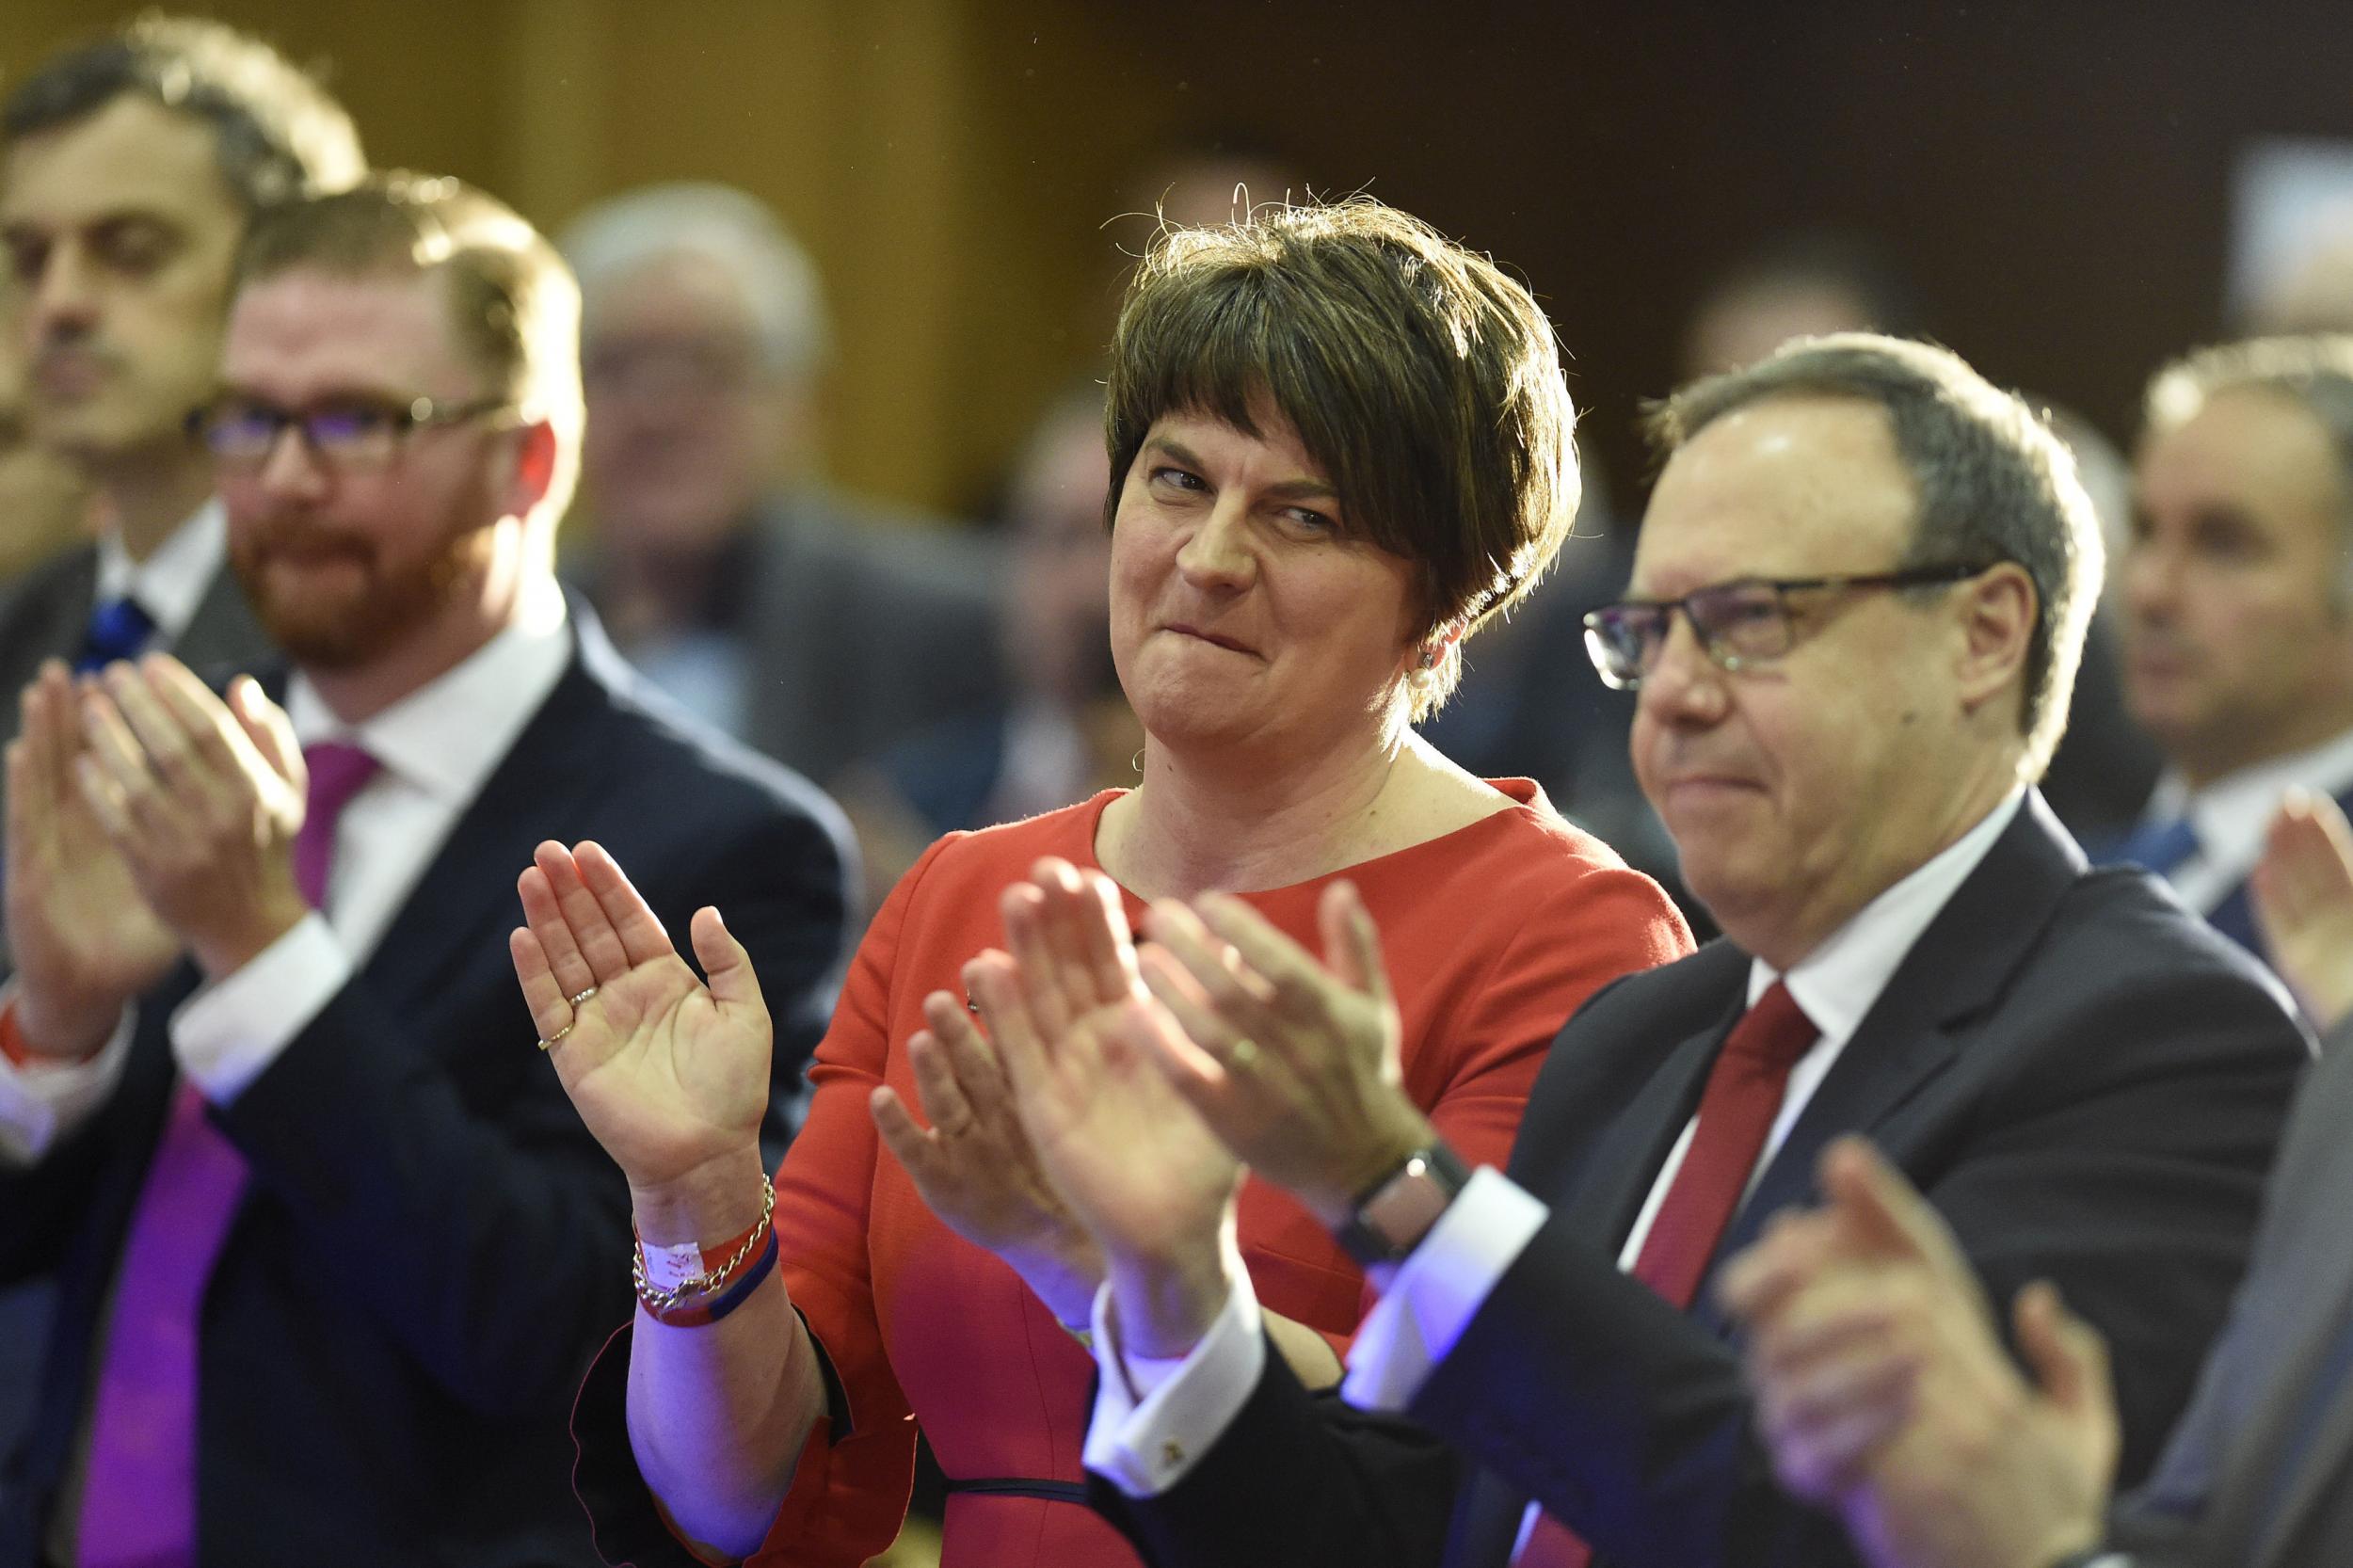 DUP deputy leader Nigel Dodds with Arlene Foster shortly before his speech to his party's annual conference